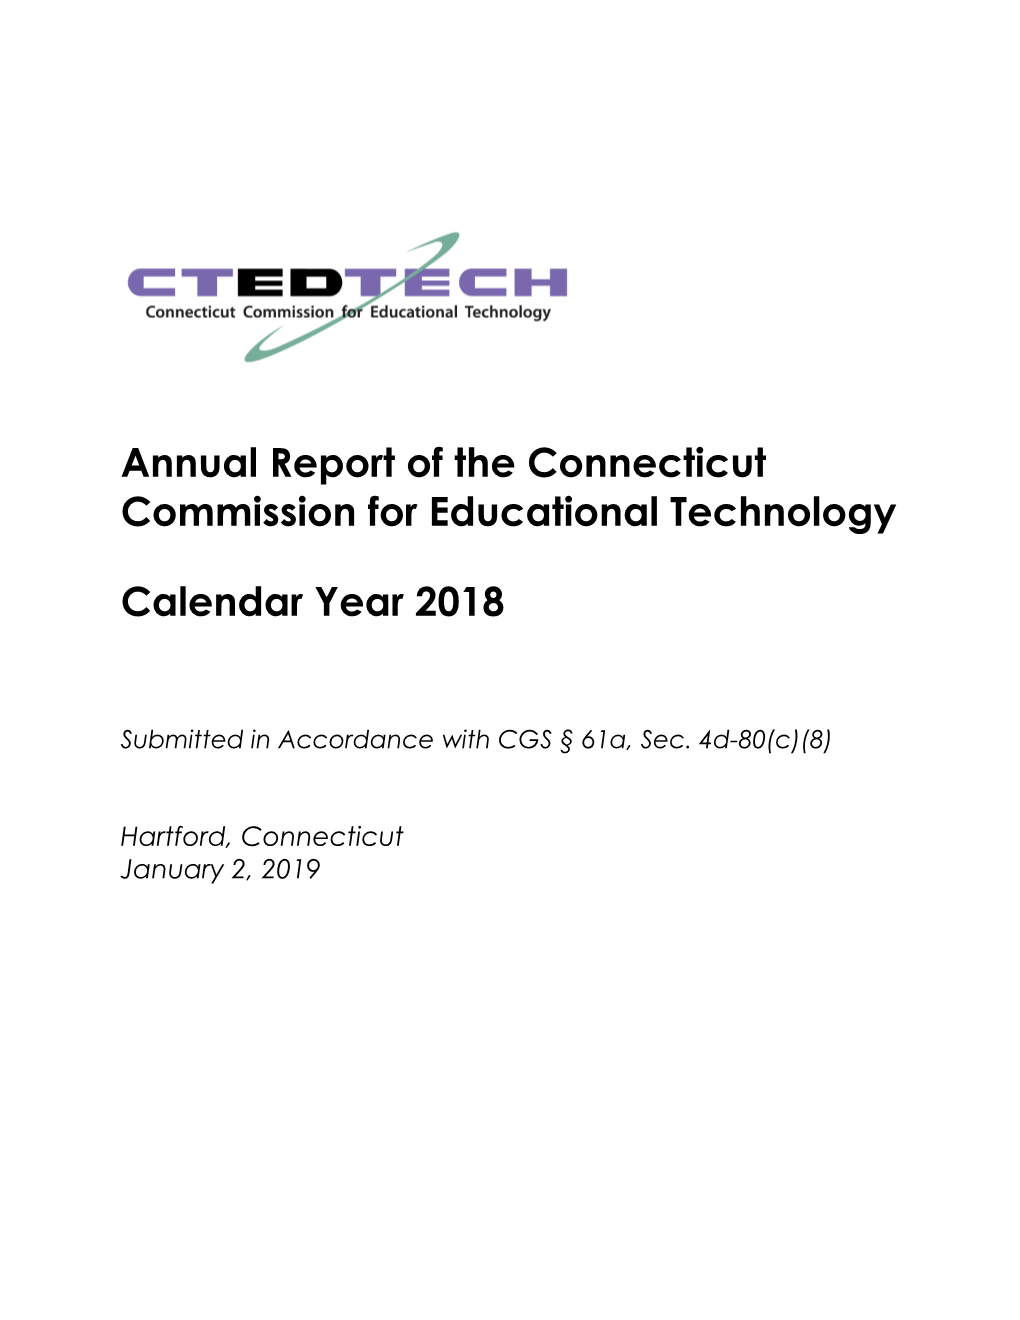 Annual Report of the Connecticut Commission for Educational